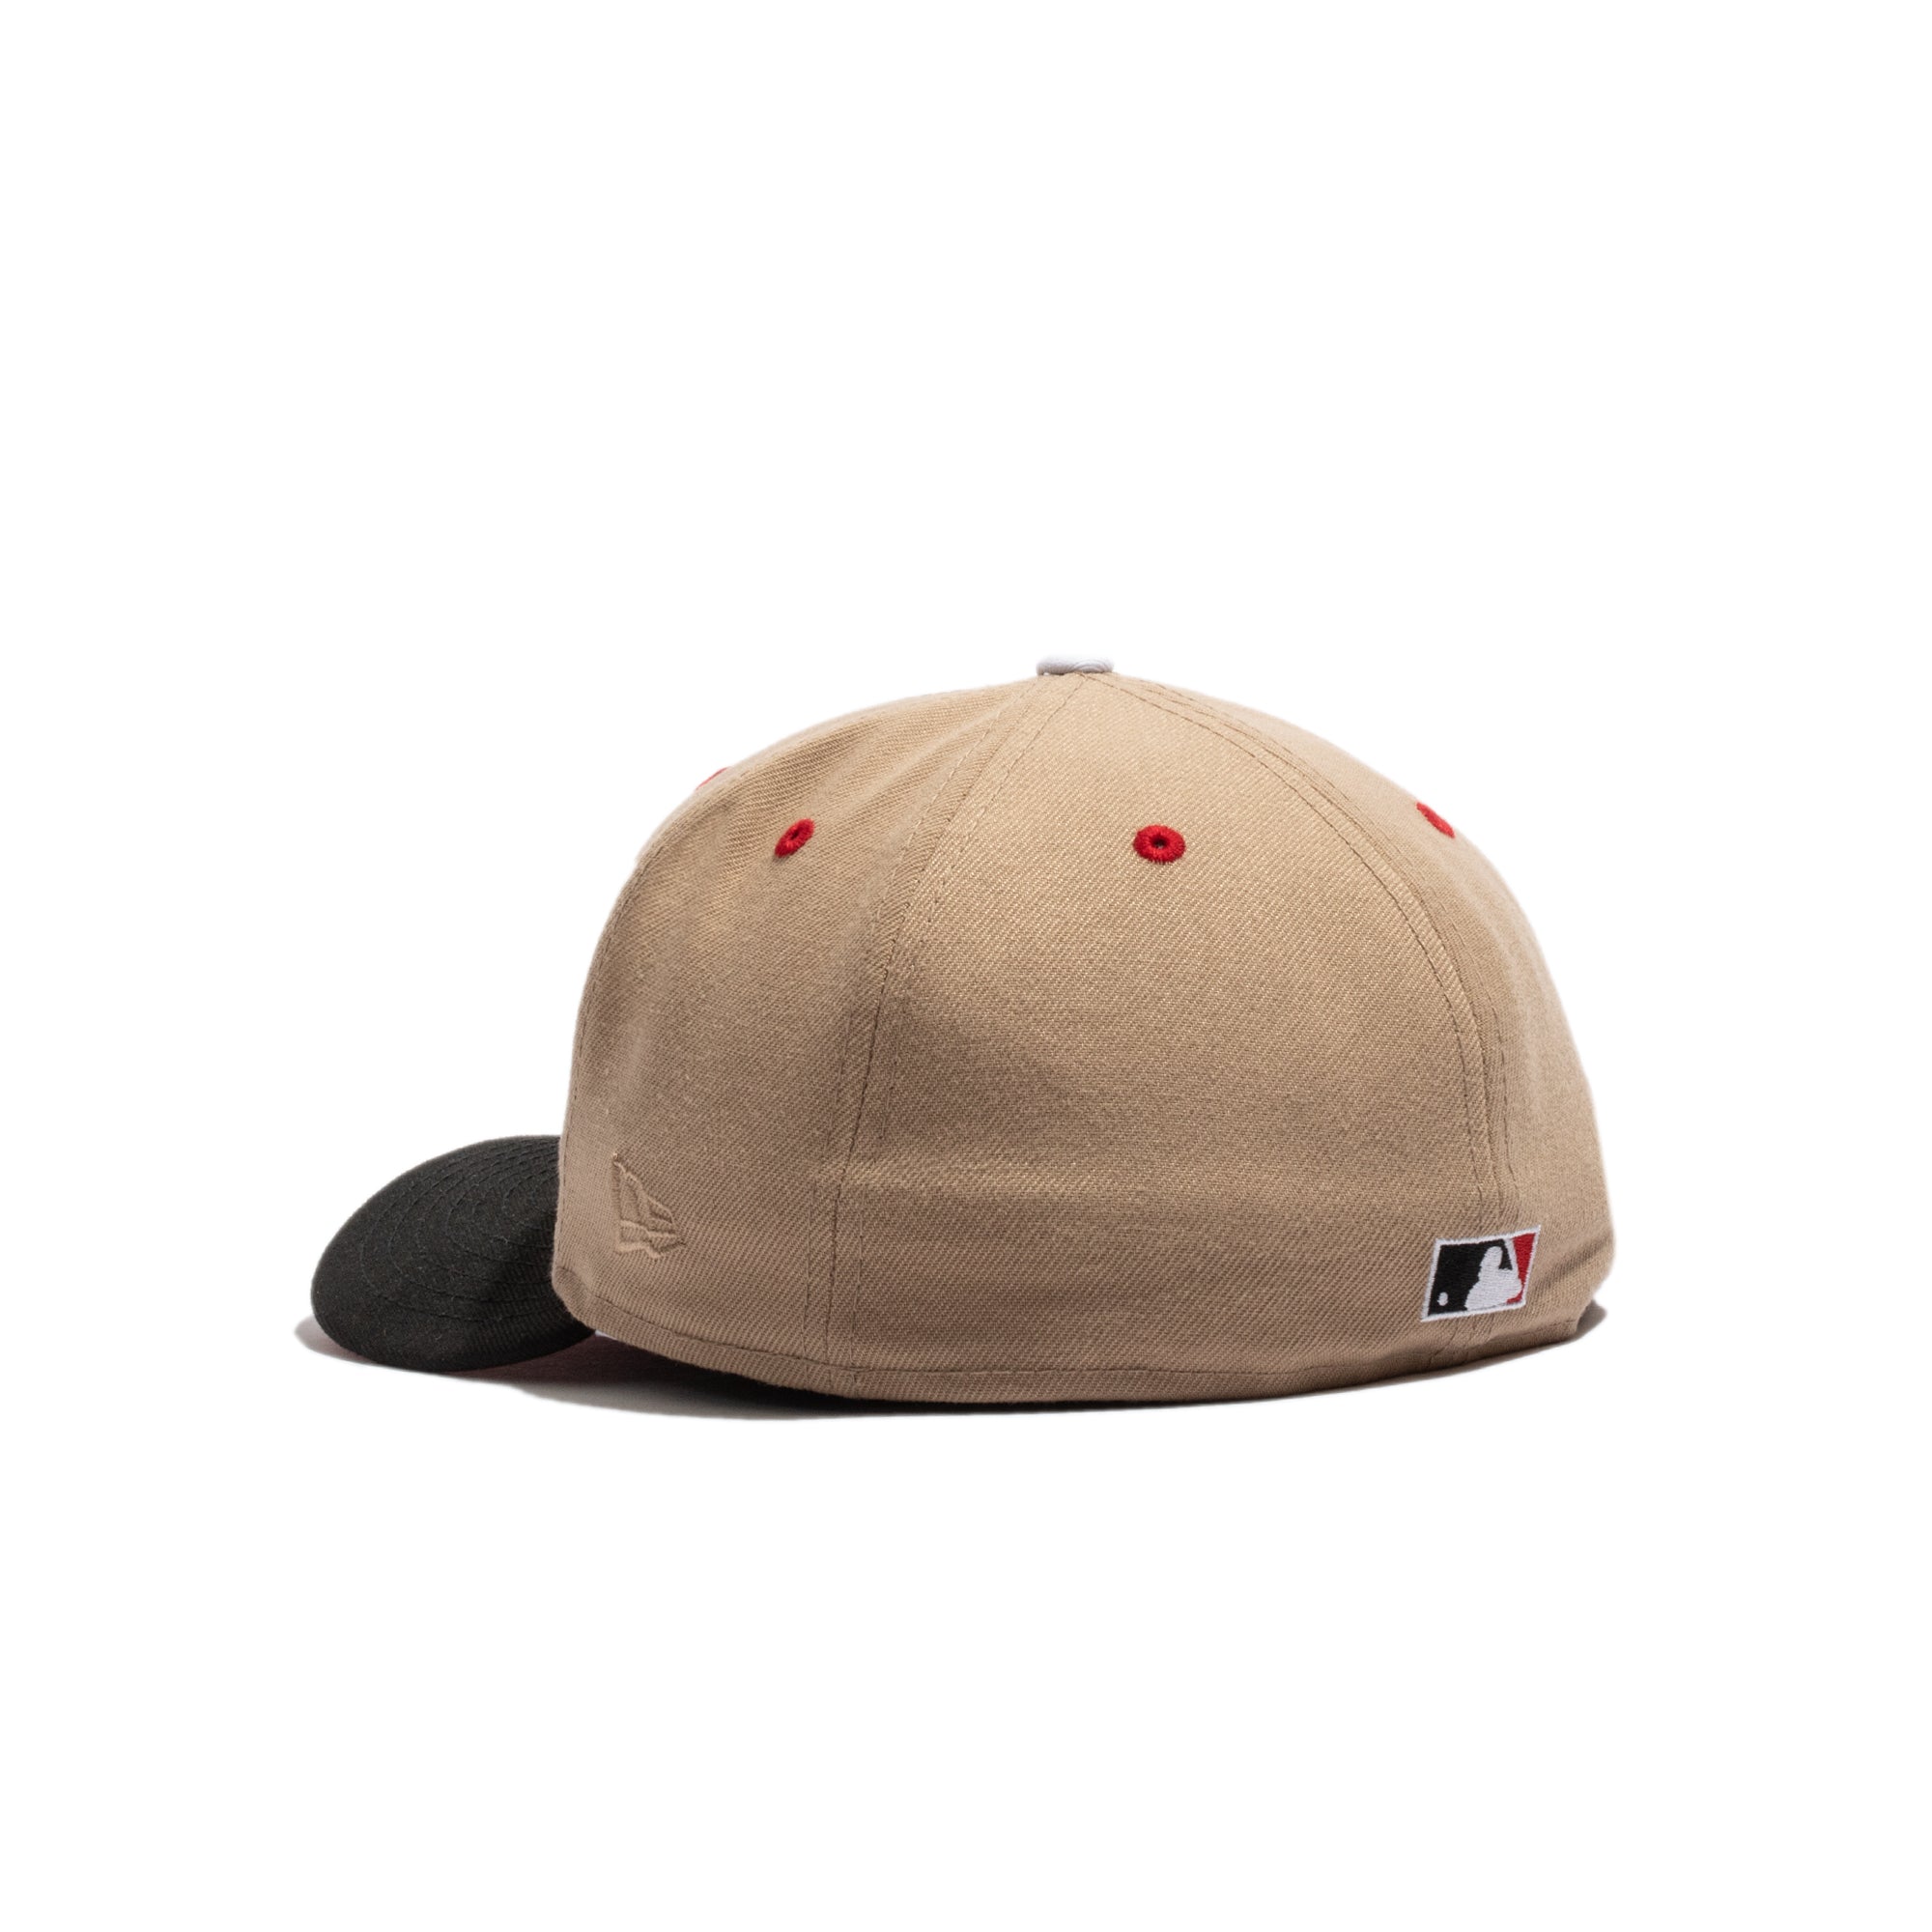 New Era 59FIFTY New York Yankees 'Ghostbuster' Fitted Hat